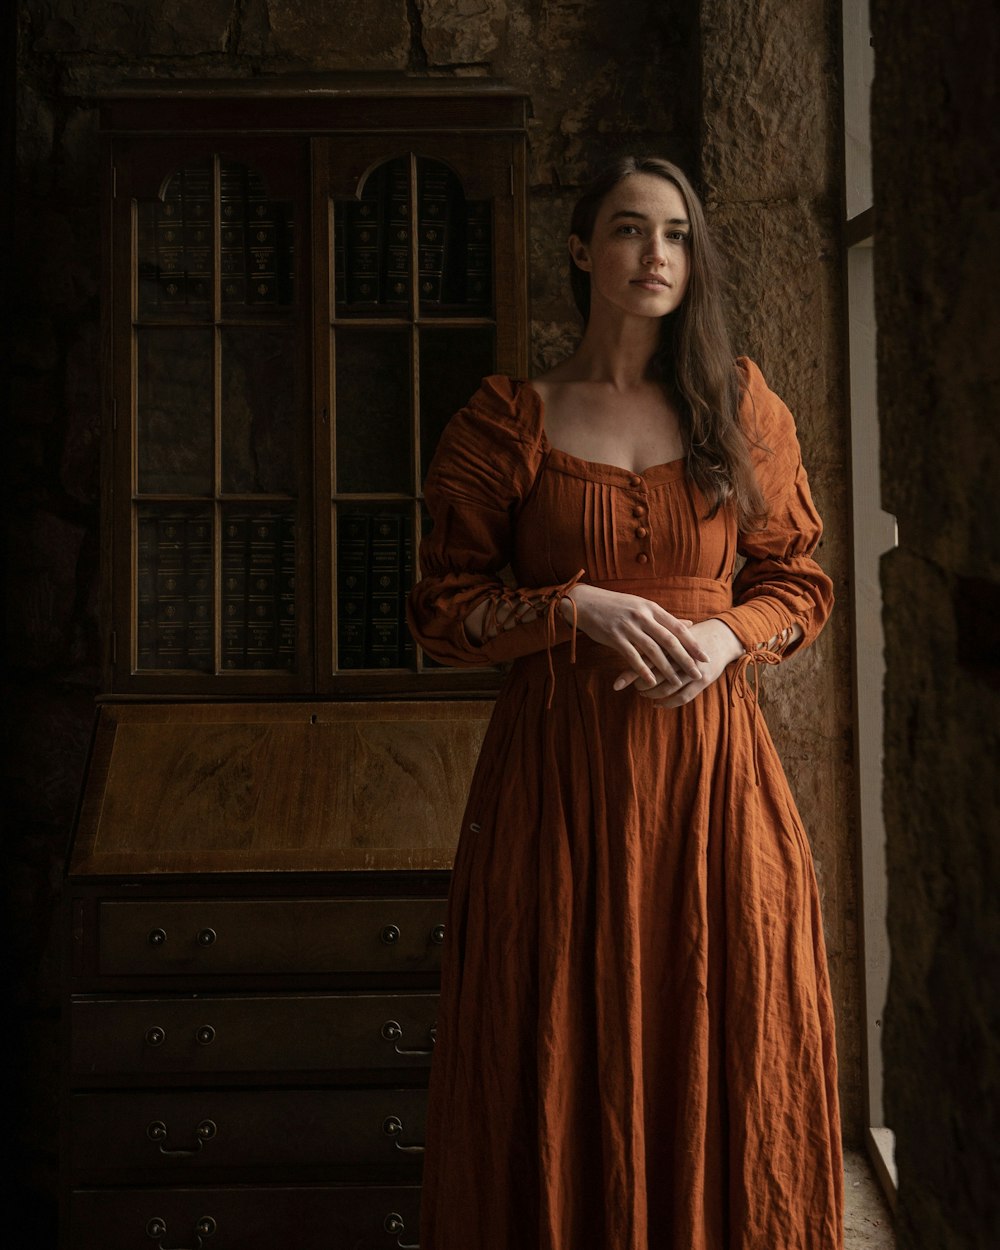 a woman in an orange dress standing in front of a dresser